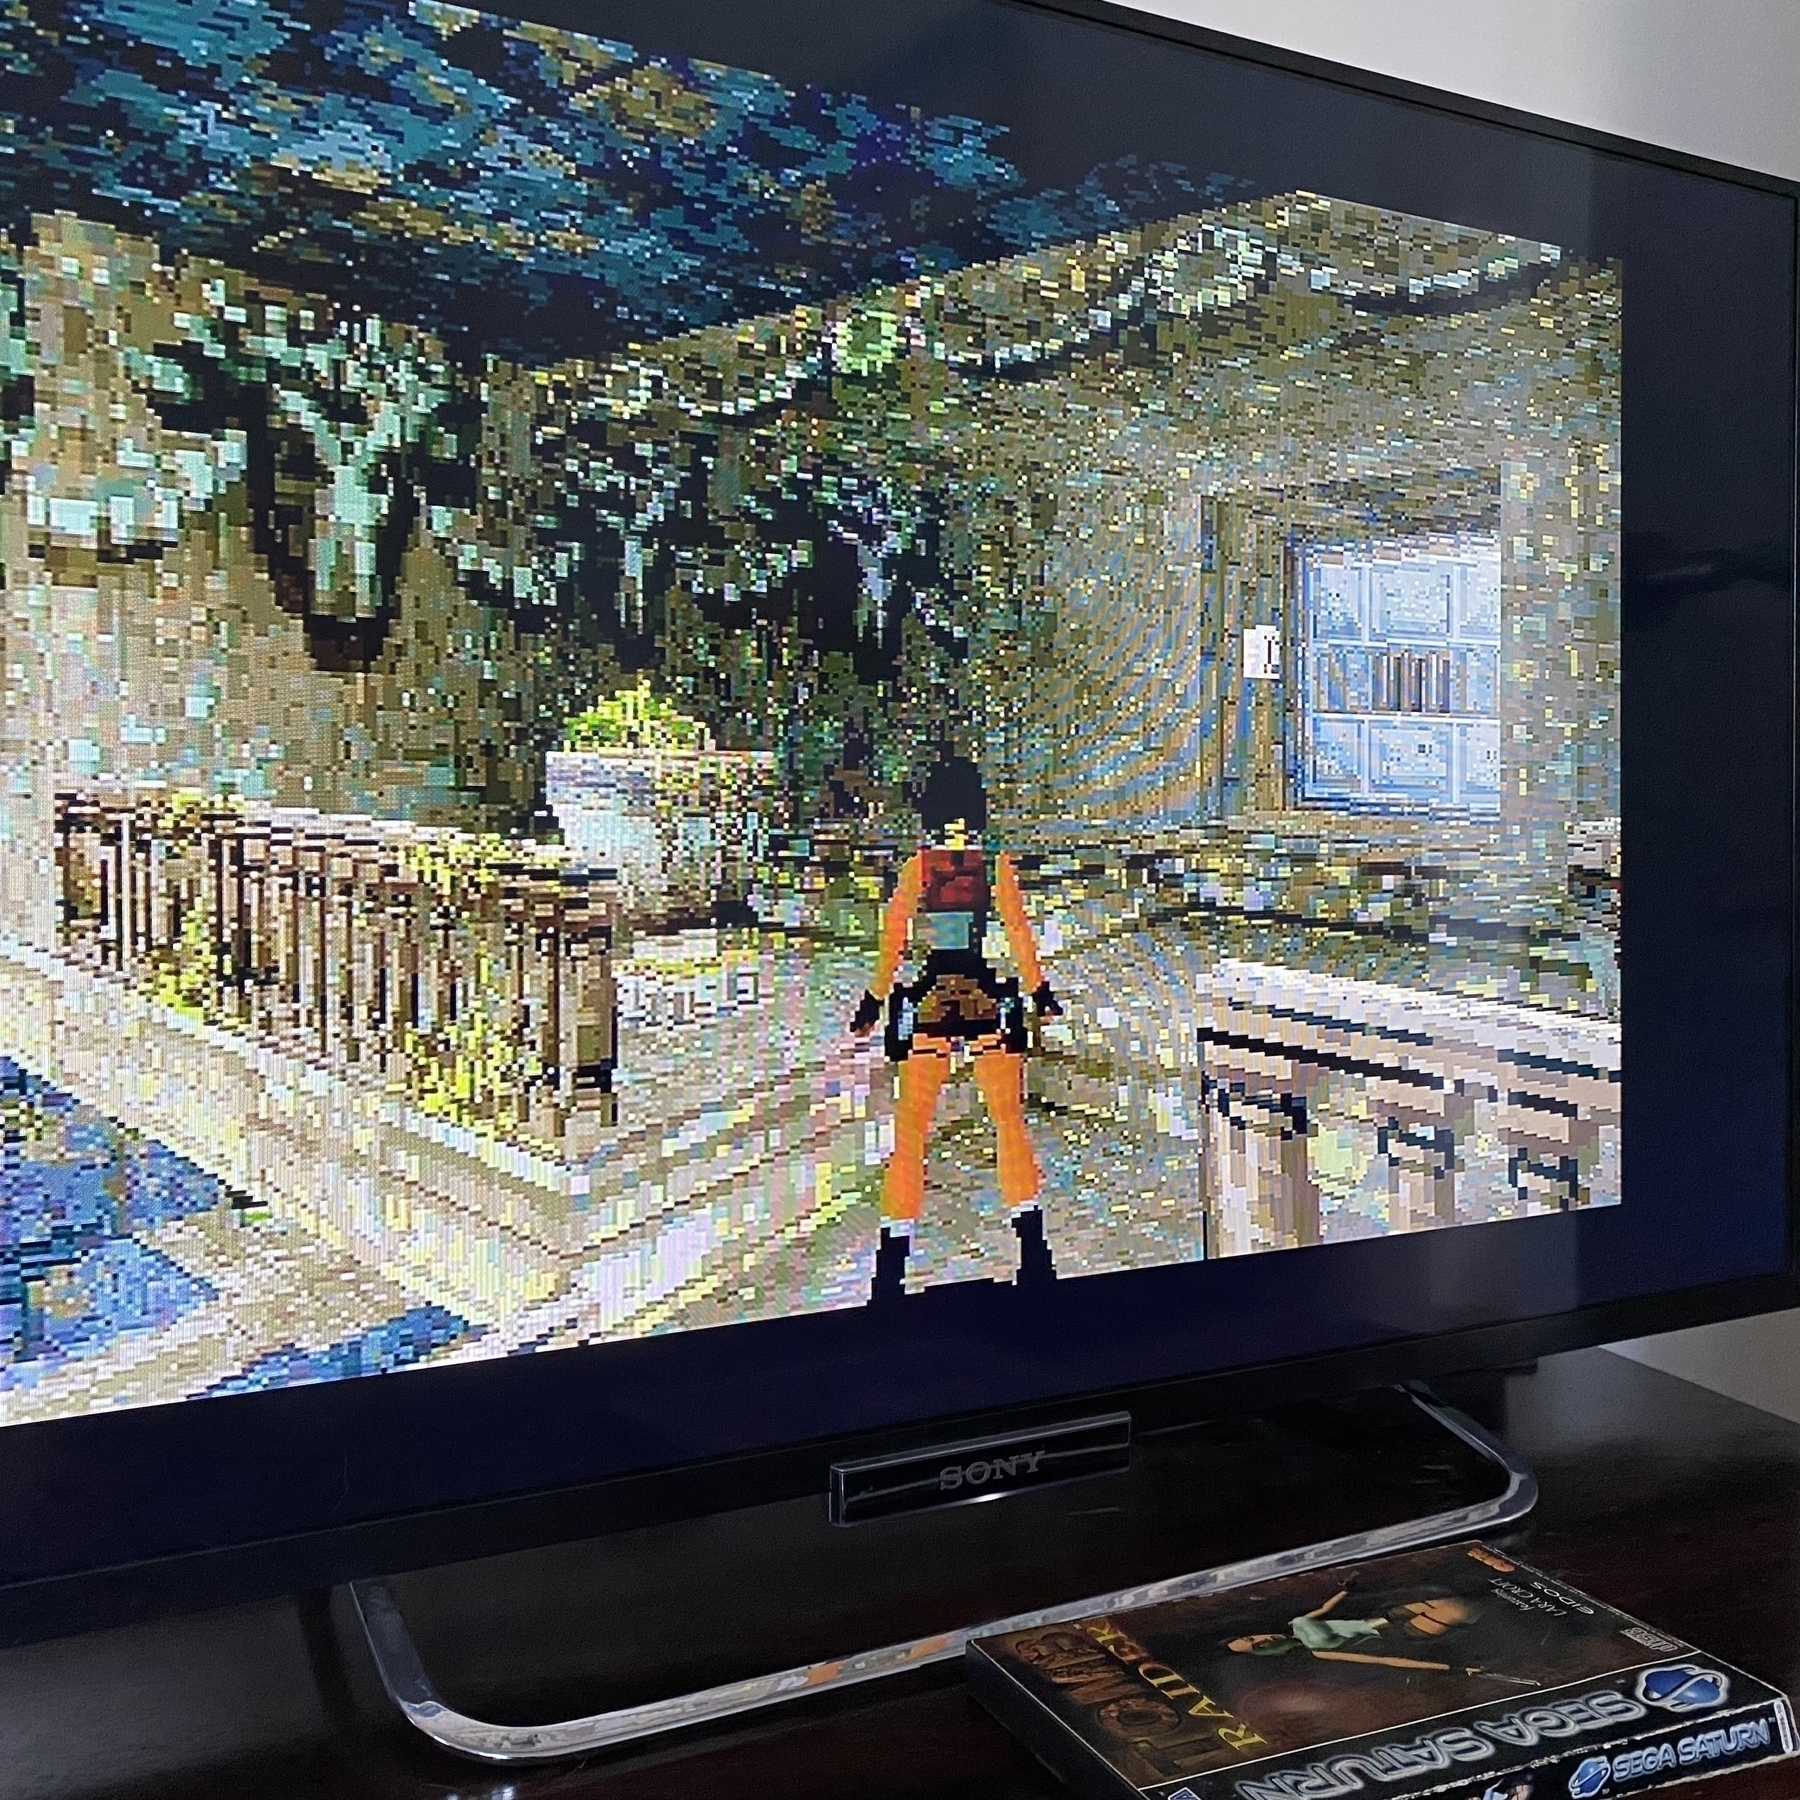 Screenshot of NTSC version of Tomb Raider, the Cistern level. Lara Croft is standing on a stone balcony looking at a disguised moveable block that’s hiding a secret area. Unlike the PAL version the texture of the block is the same as the surrounding walls so it’s harder to find. (Note the screen borders as this is running on my 50Hz PAL Saturn!)